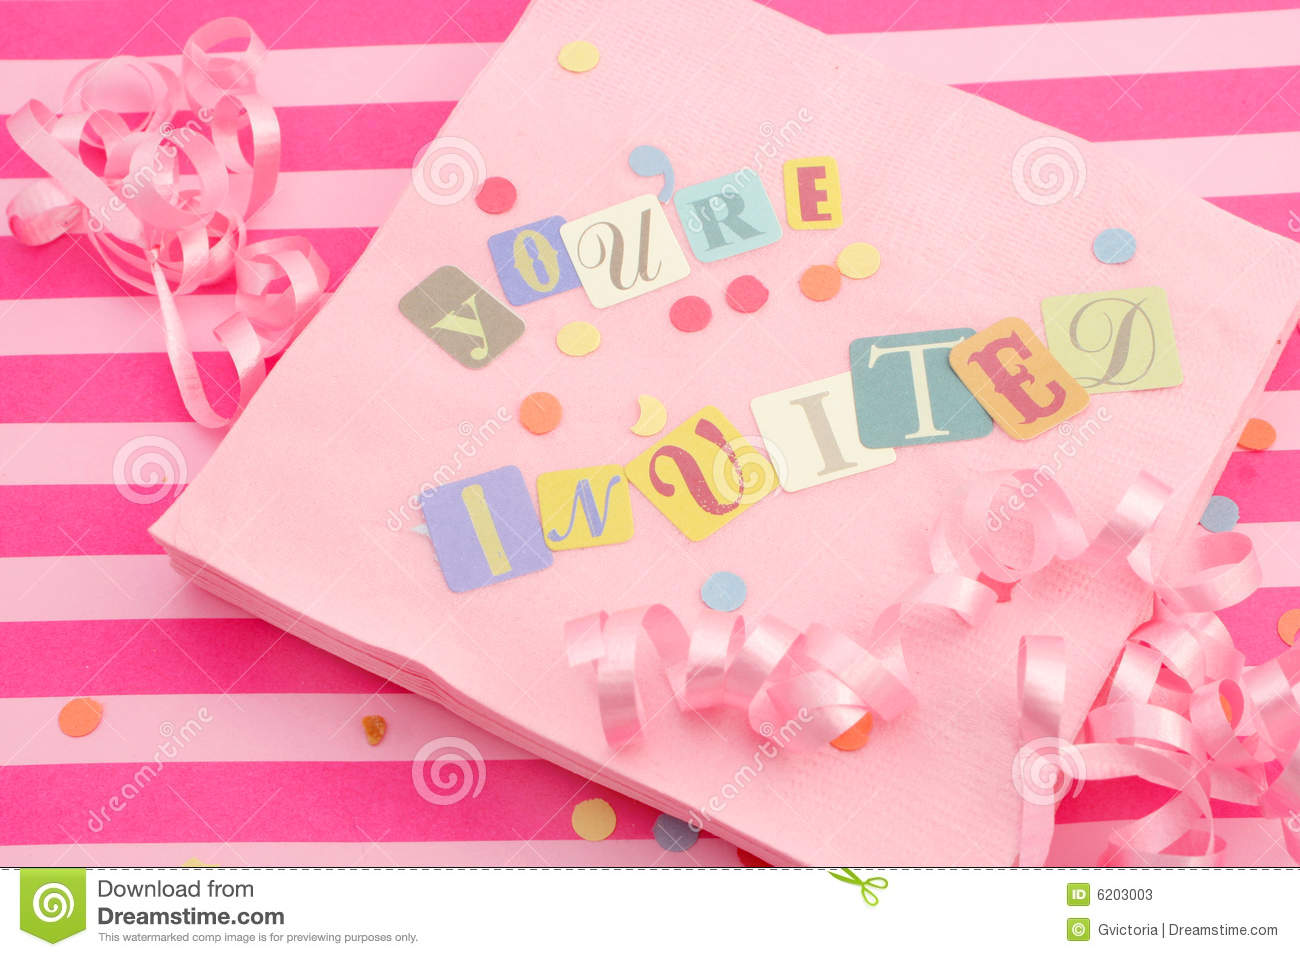 Cut Out Letters Spelling You Re Invited On Pink Napkins With Curled